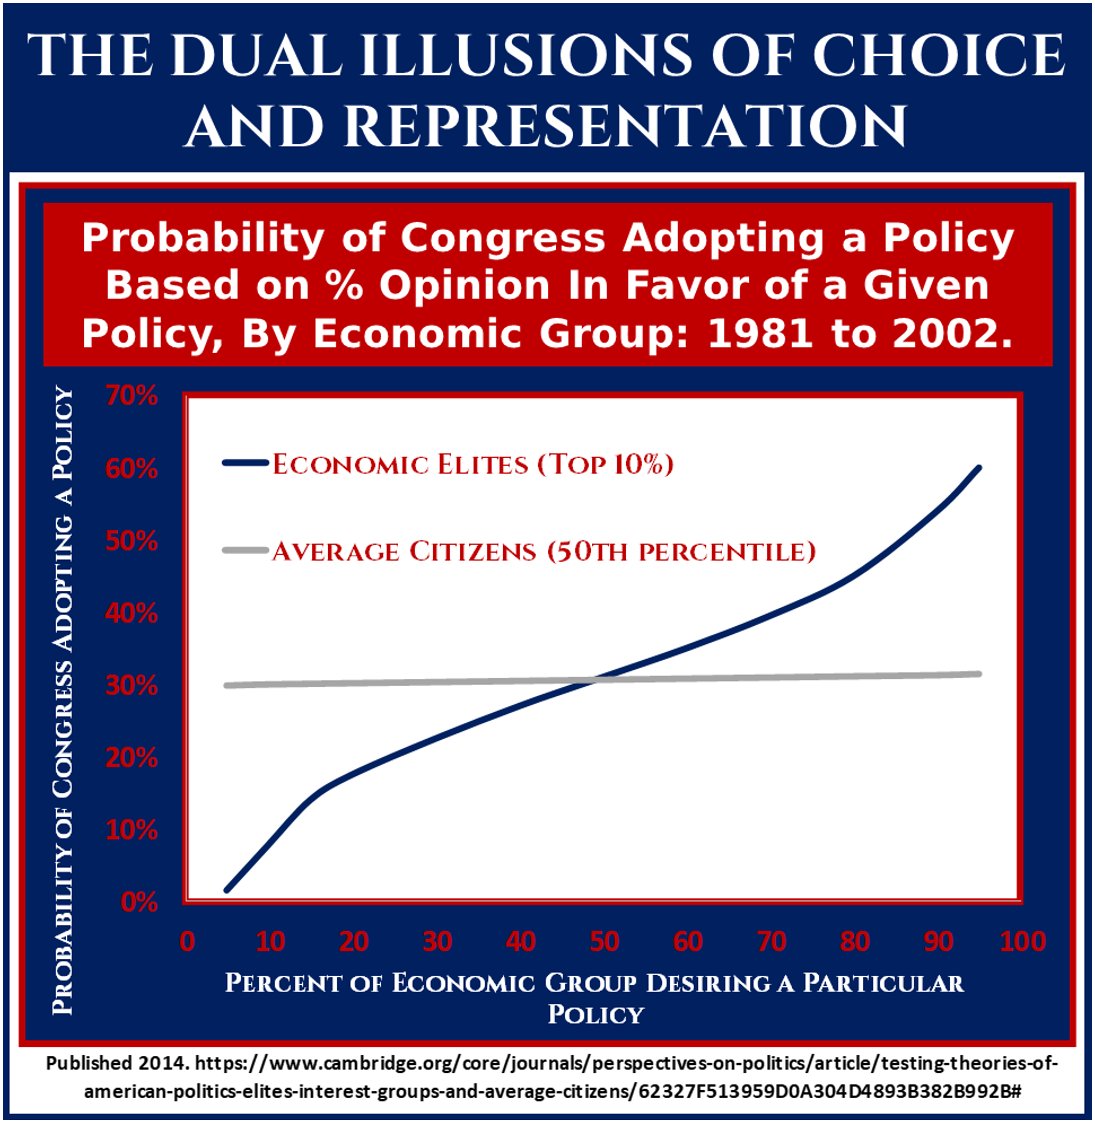 5. B/c both houses could more easily come under 1 set of forces, it ignited a bidding war on House & Senate seats. The value of both seats skyrocketed, & put the congress firmly under the control of the Ruling Elites.Now, congress is only responsive to the Elites. No Check.